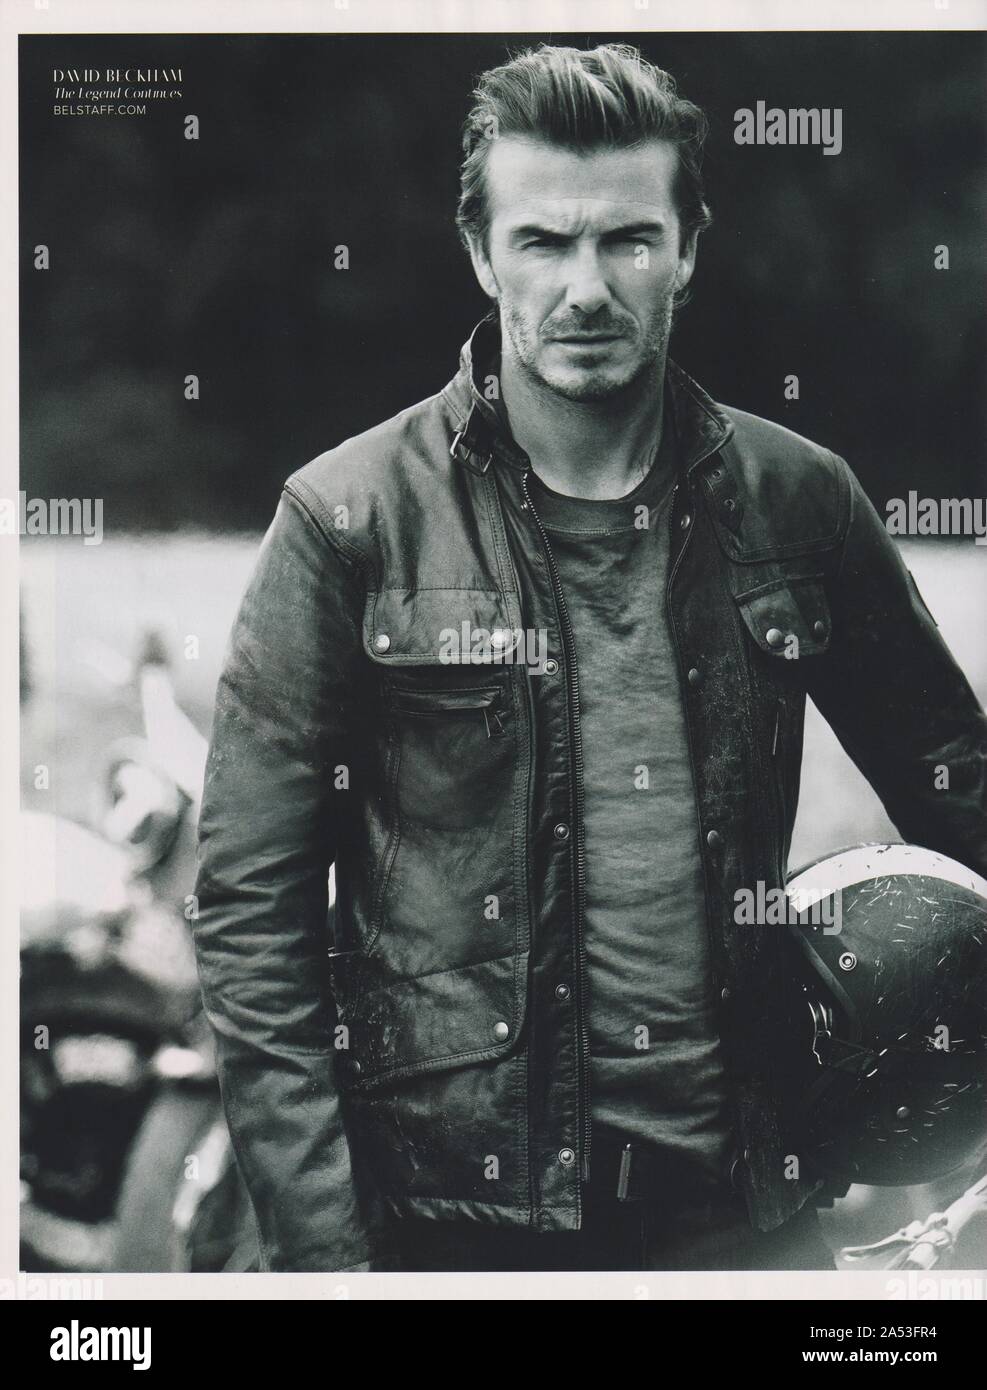 poster advertising Belstaff clothing brand with David Beckham in paper  magazine from 2014 year, advertisement, creative Belstaff advert from 2010s  Stock Photo - Alamy